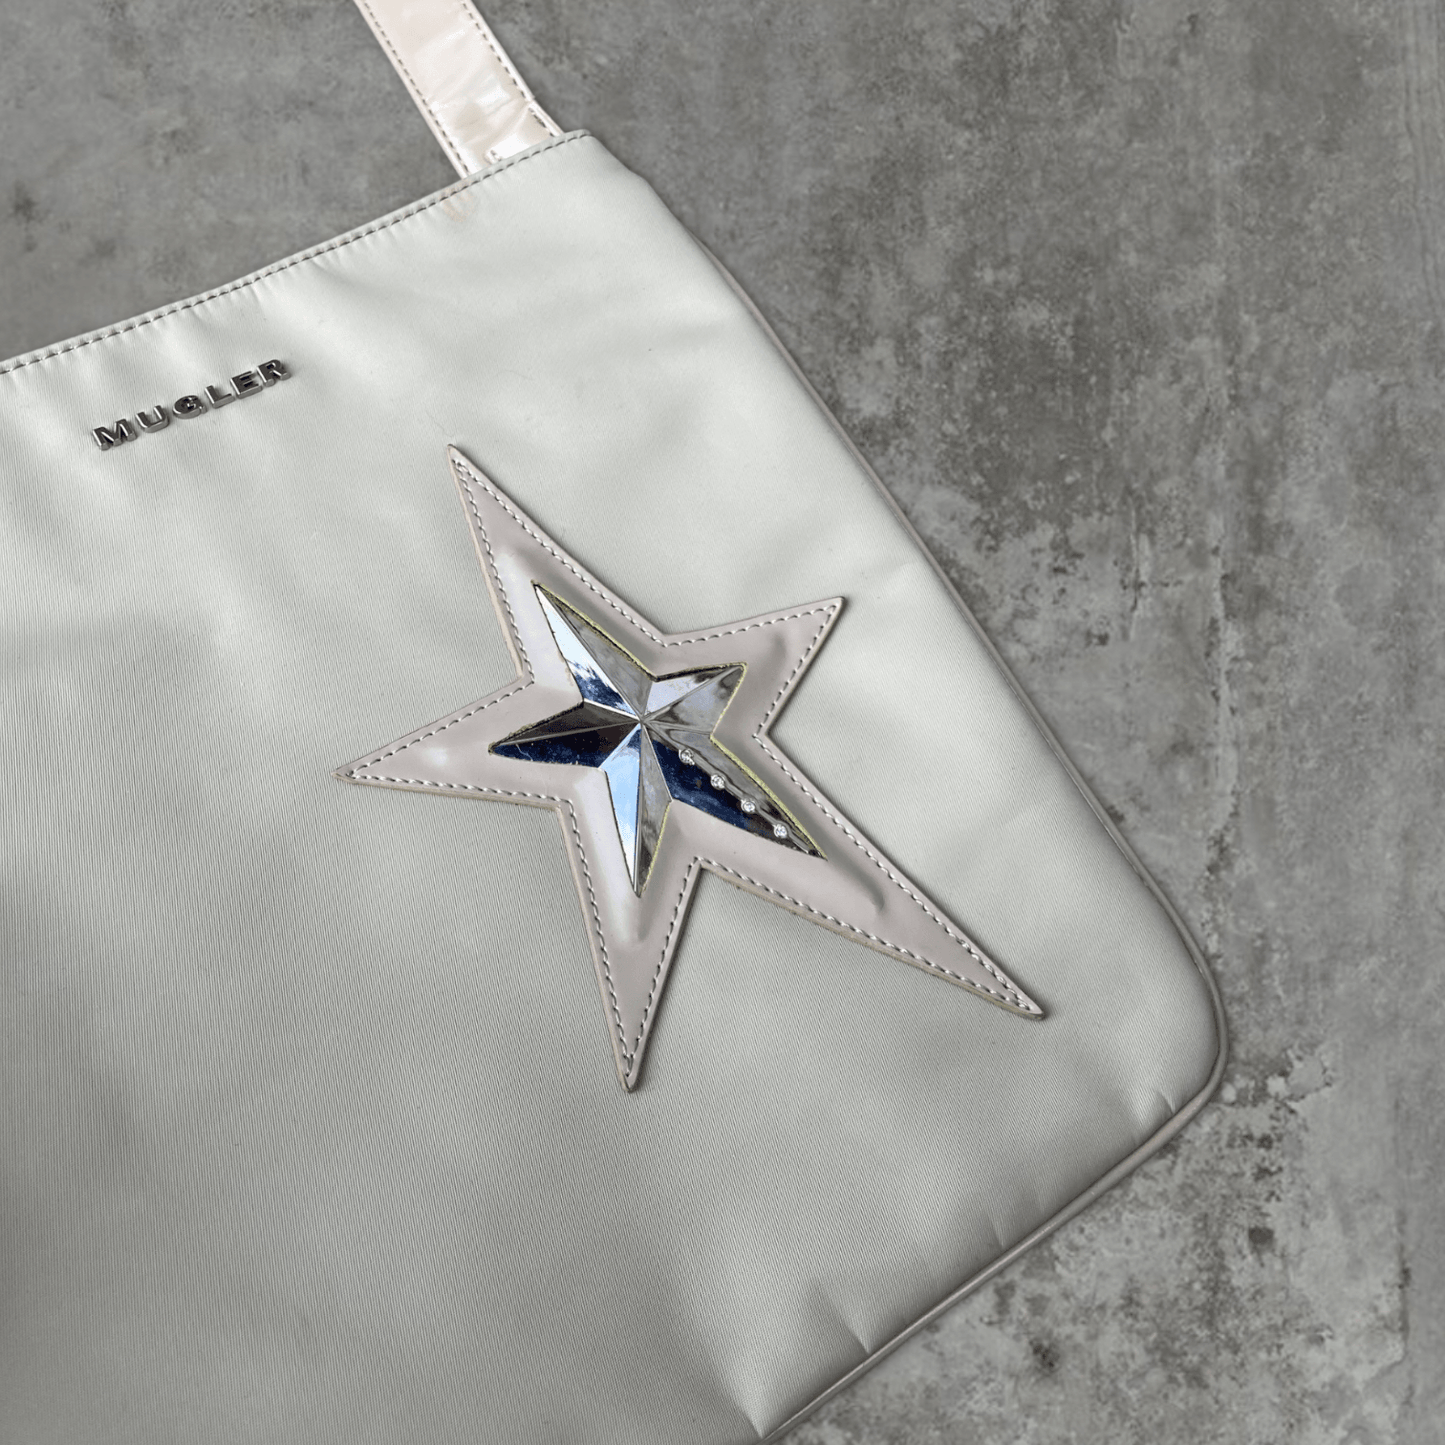 THIERRY MUGLER STAR SIDE BAG - Known Source